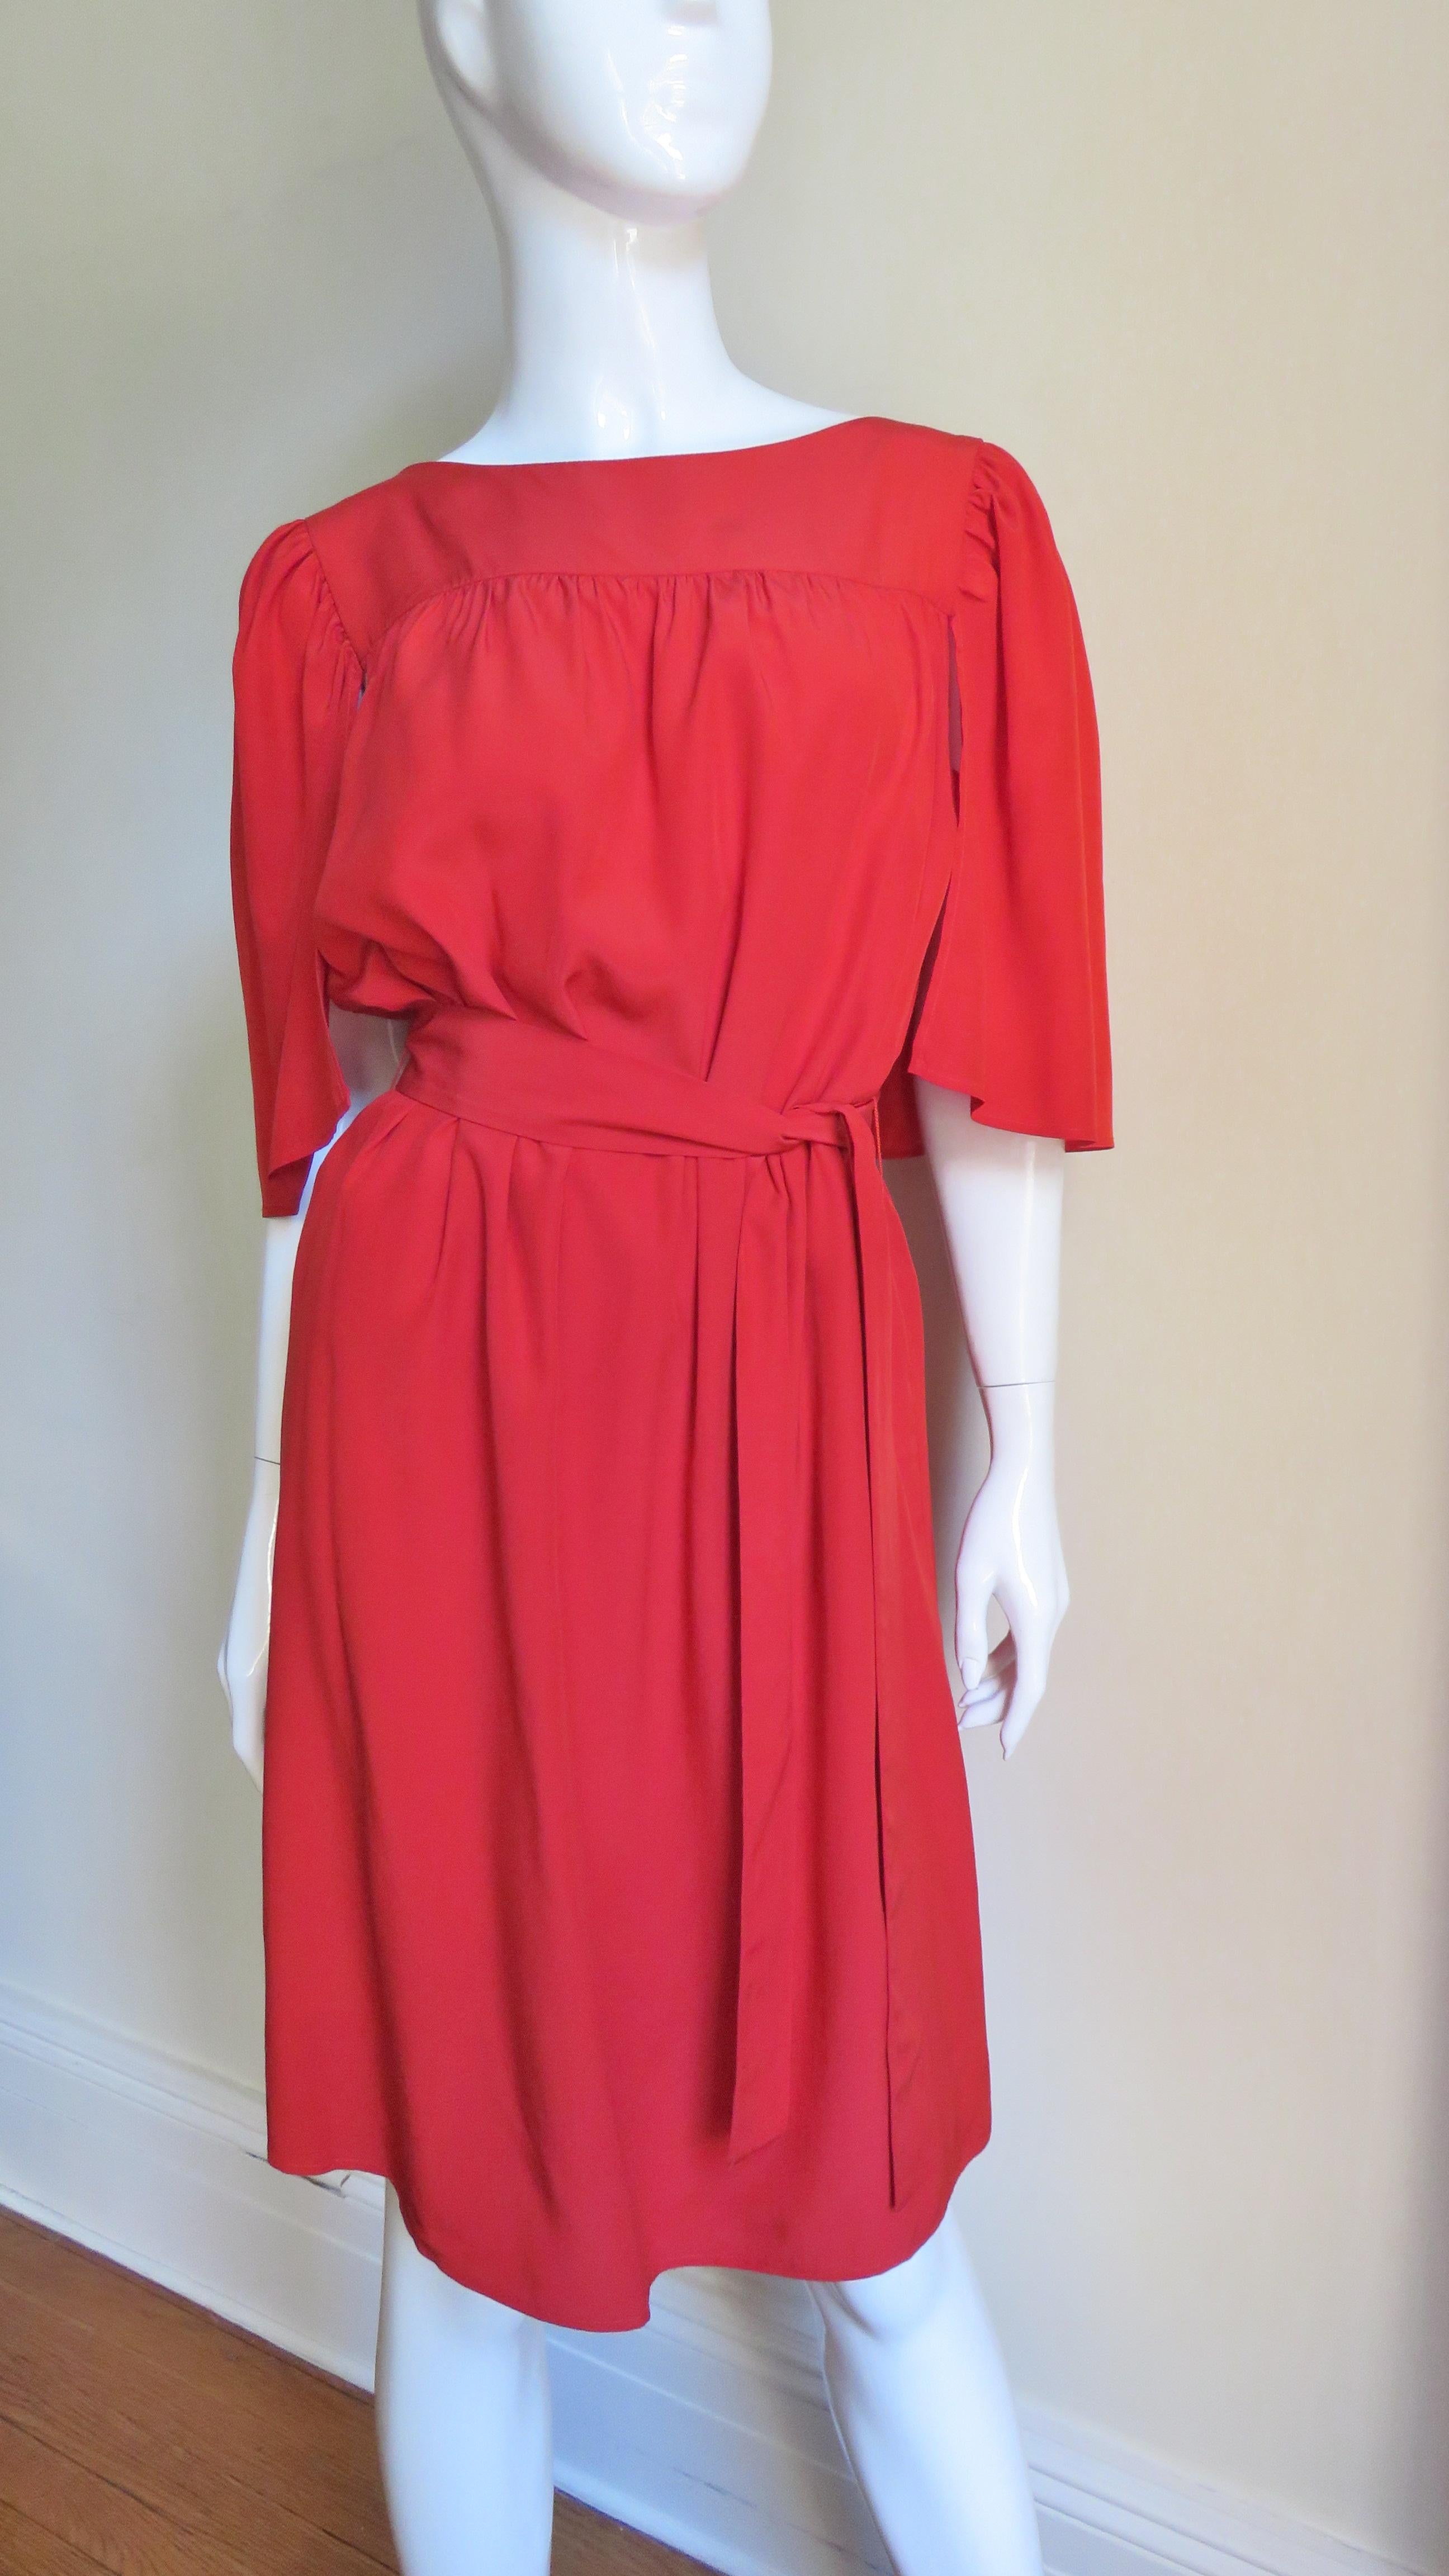 A fabulous red silk dress from Yves St Laurent, YSL 2011 Resort collection.  It has a bateau neckline from which a fabulous caplet falls in the back around to the front shoulders. It comes with a matching tie belt and is lined in matching silk.  No